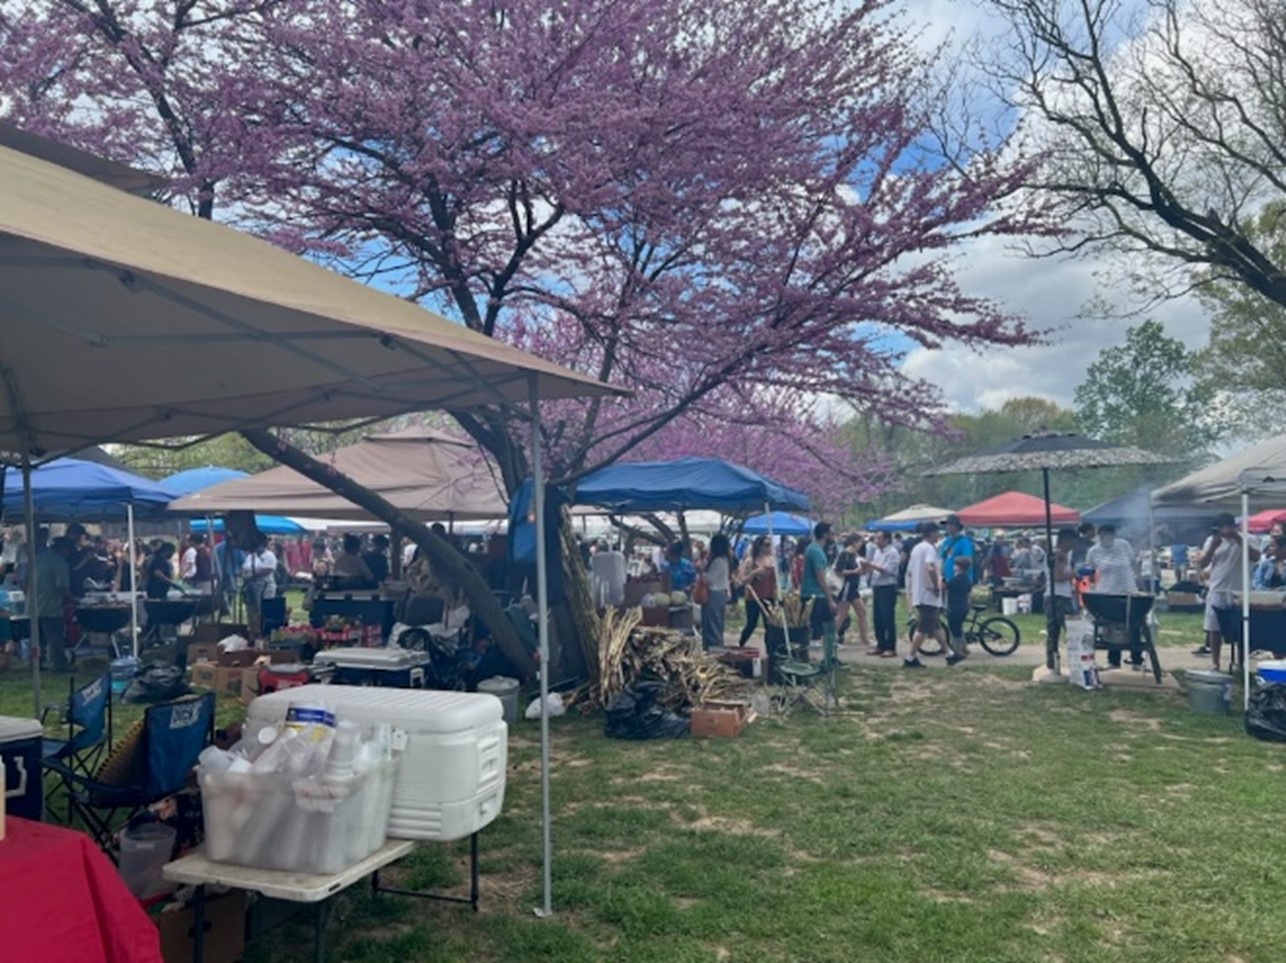 The Southeast Asian Market at FDR Park 